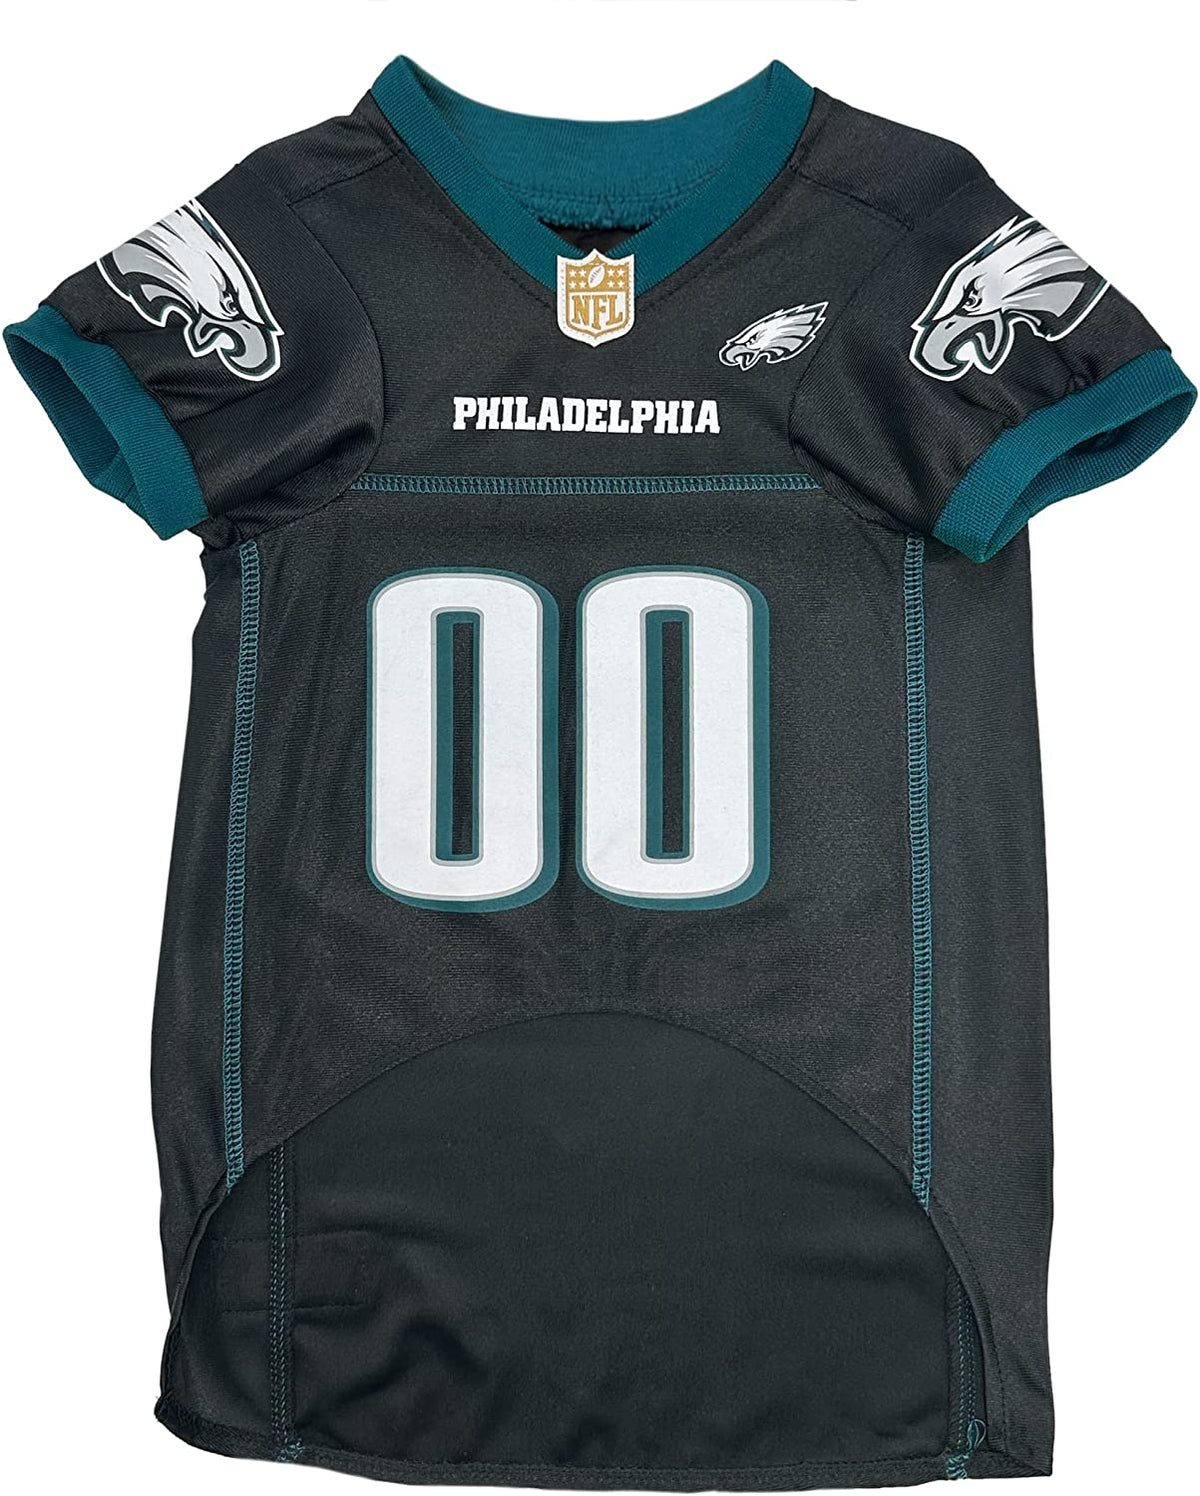 eagles jersey colors